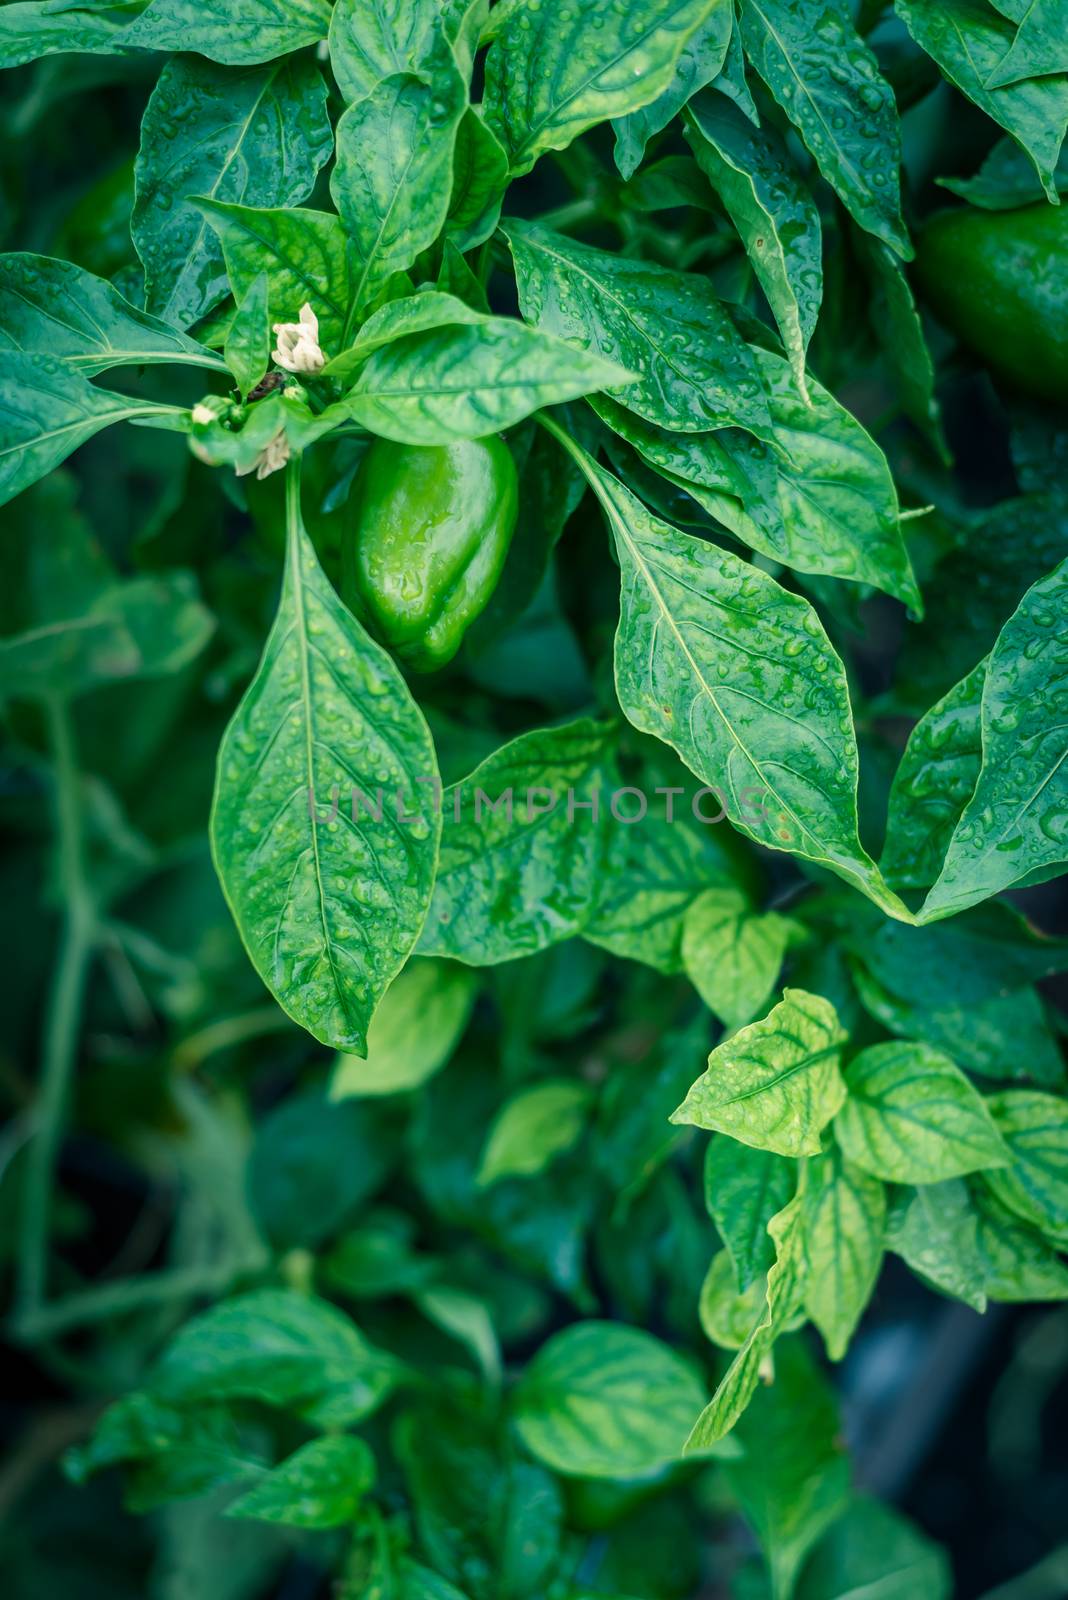 Vintage tone of organic large green bell peppers with flower and water drop ready to harvest by trongnguyen